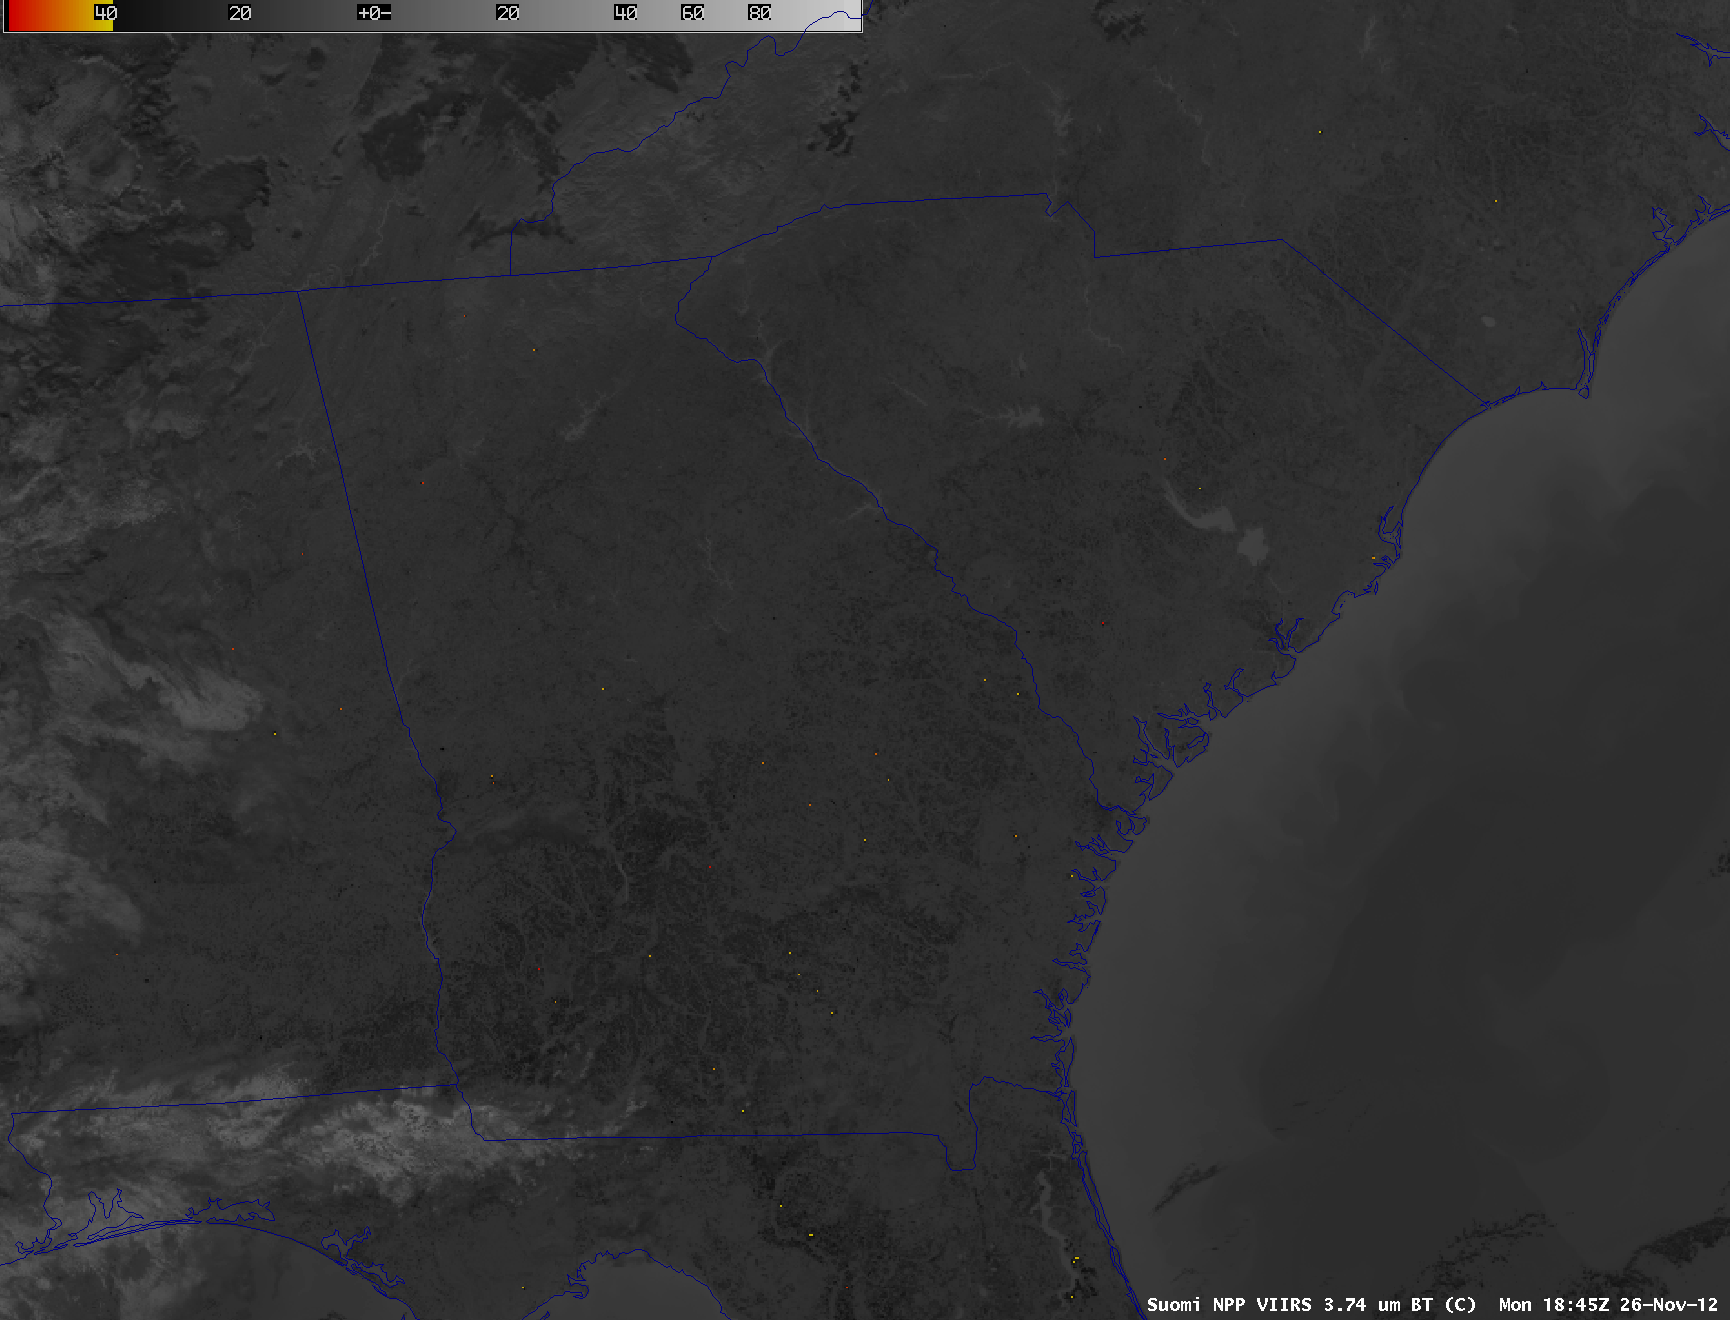 GOES-13 3.9 Âµm and Suomi NPP VIIRS 3.74 Âµm shortwave IR channel images